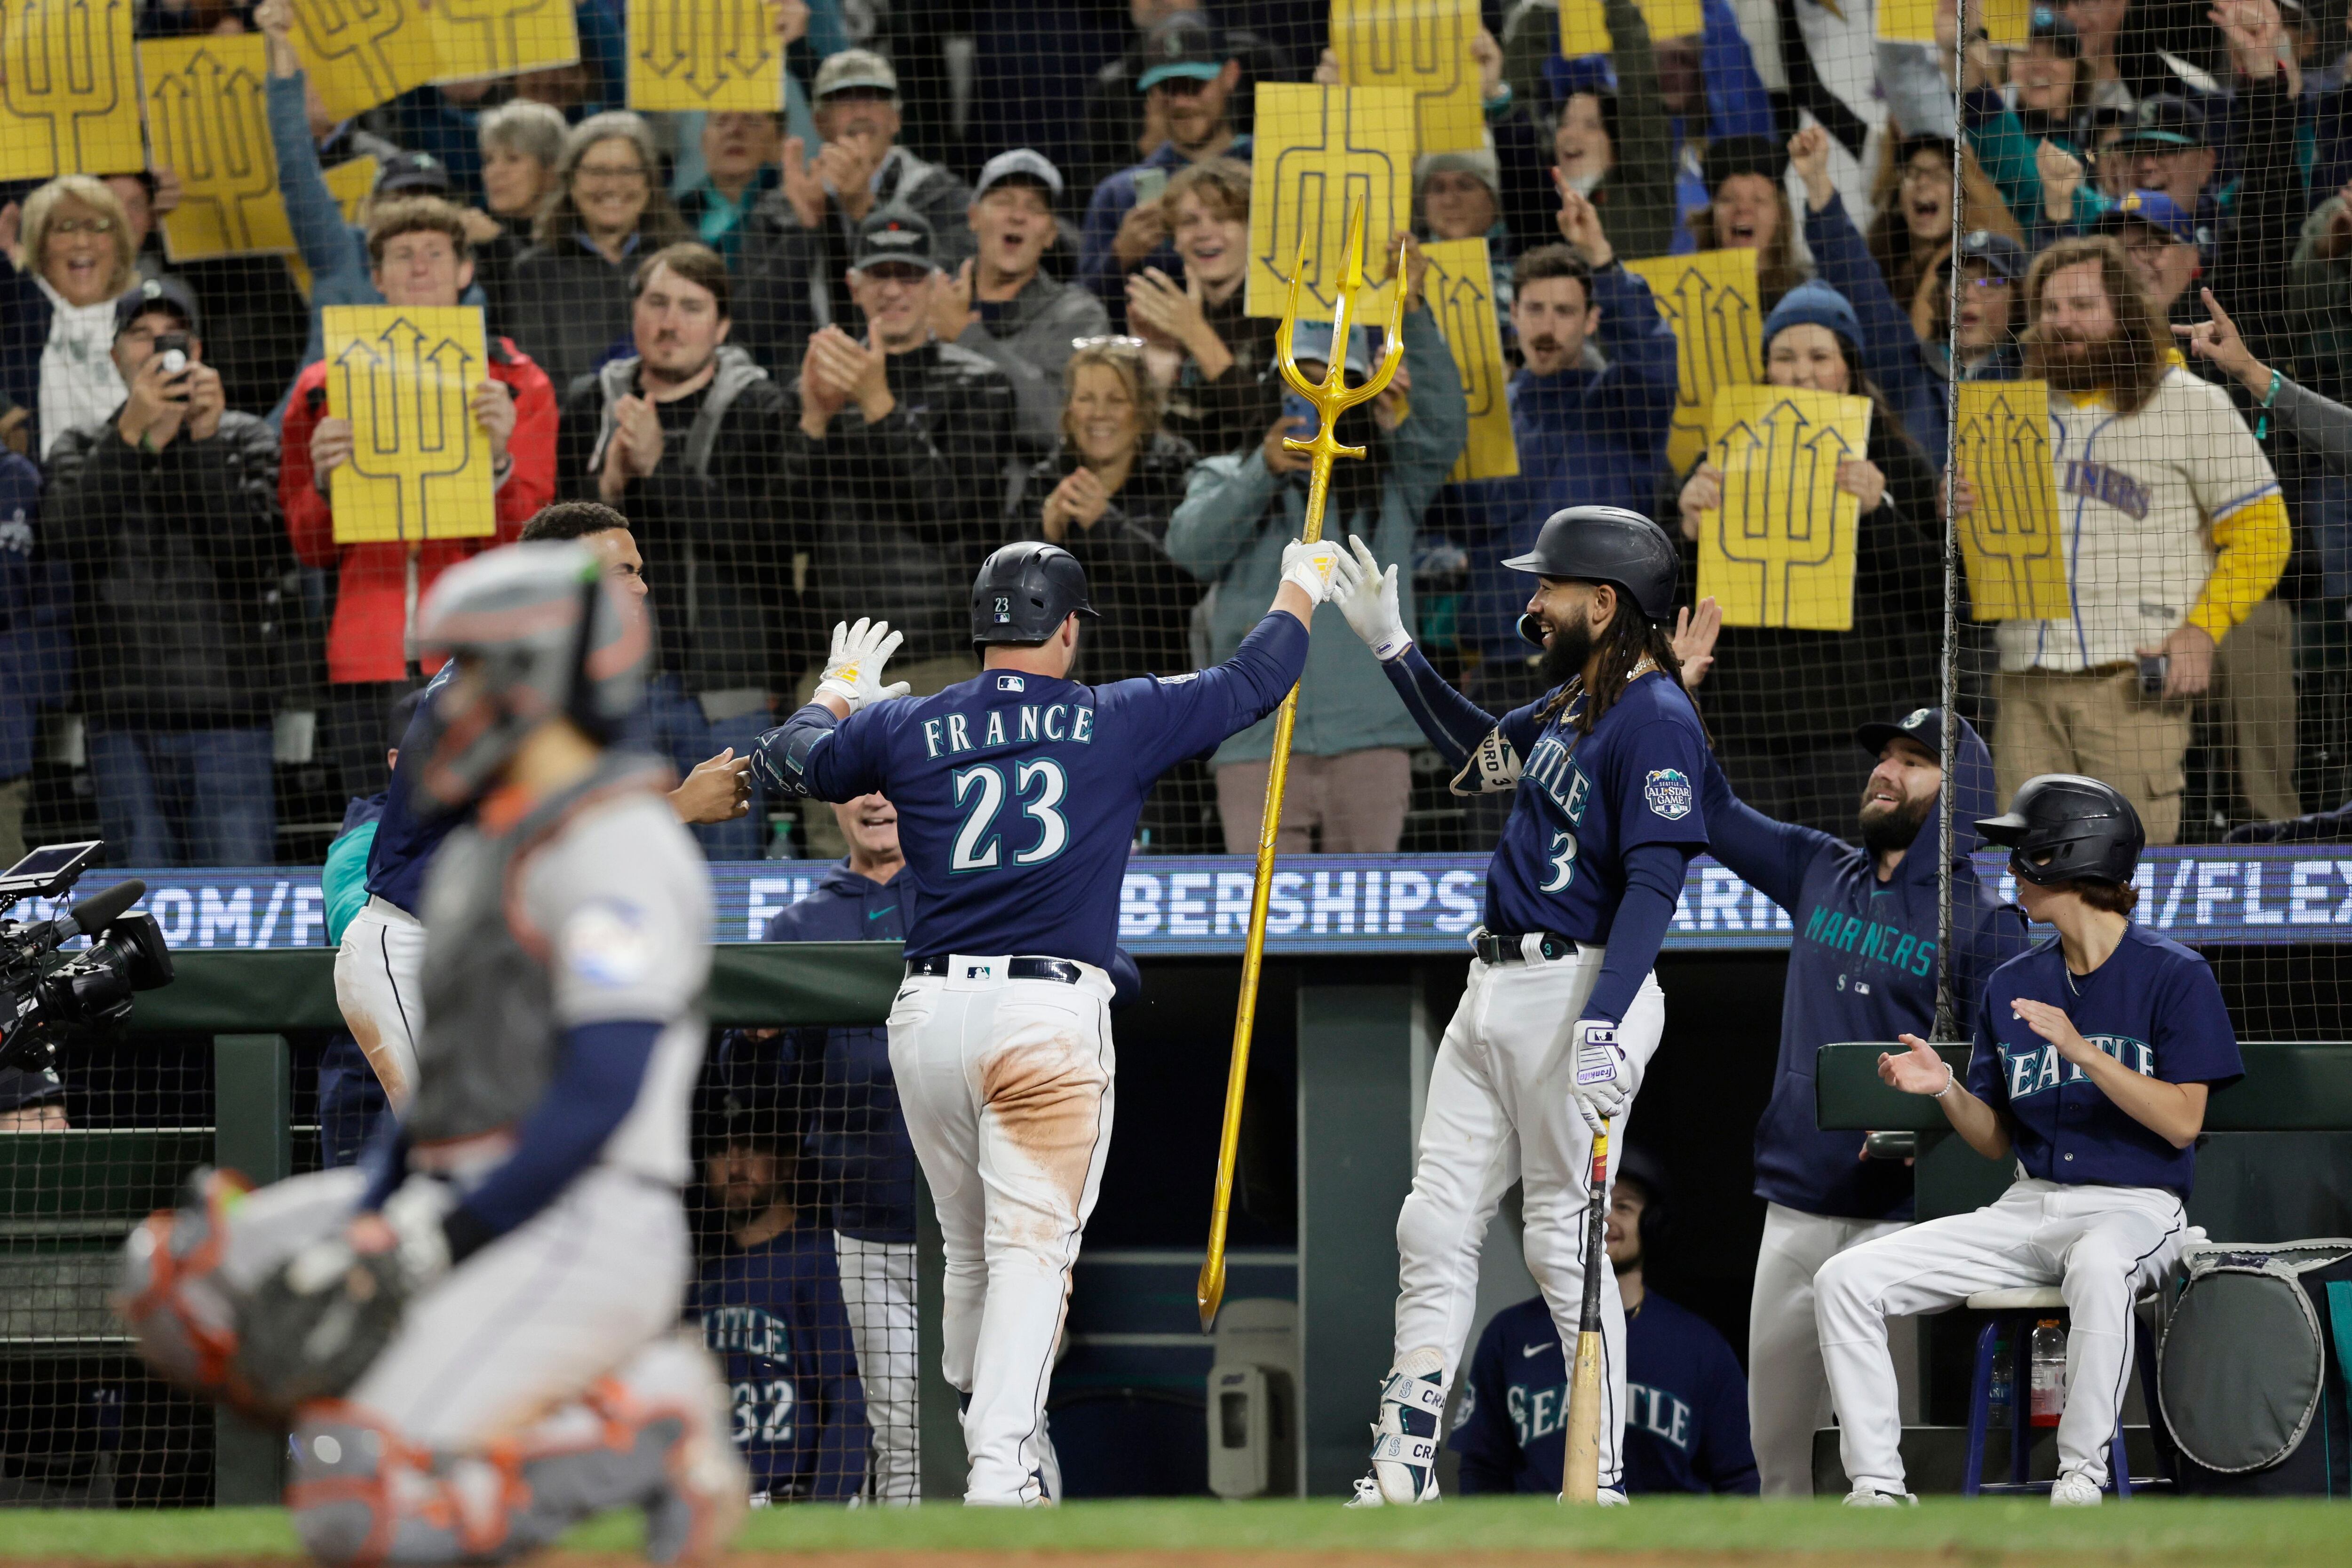 Mariners lose Game 5 of playoff series